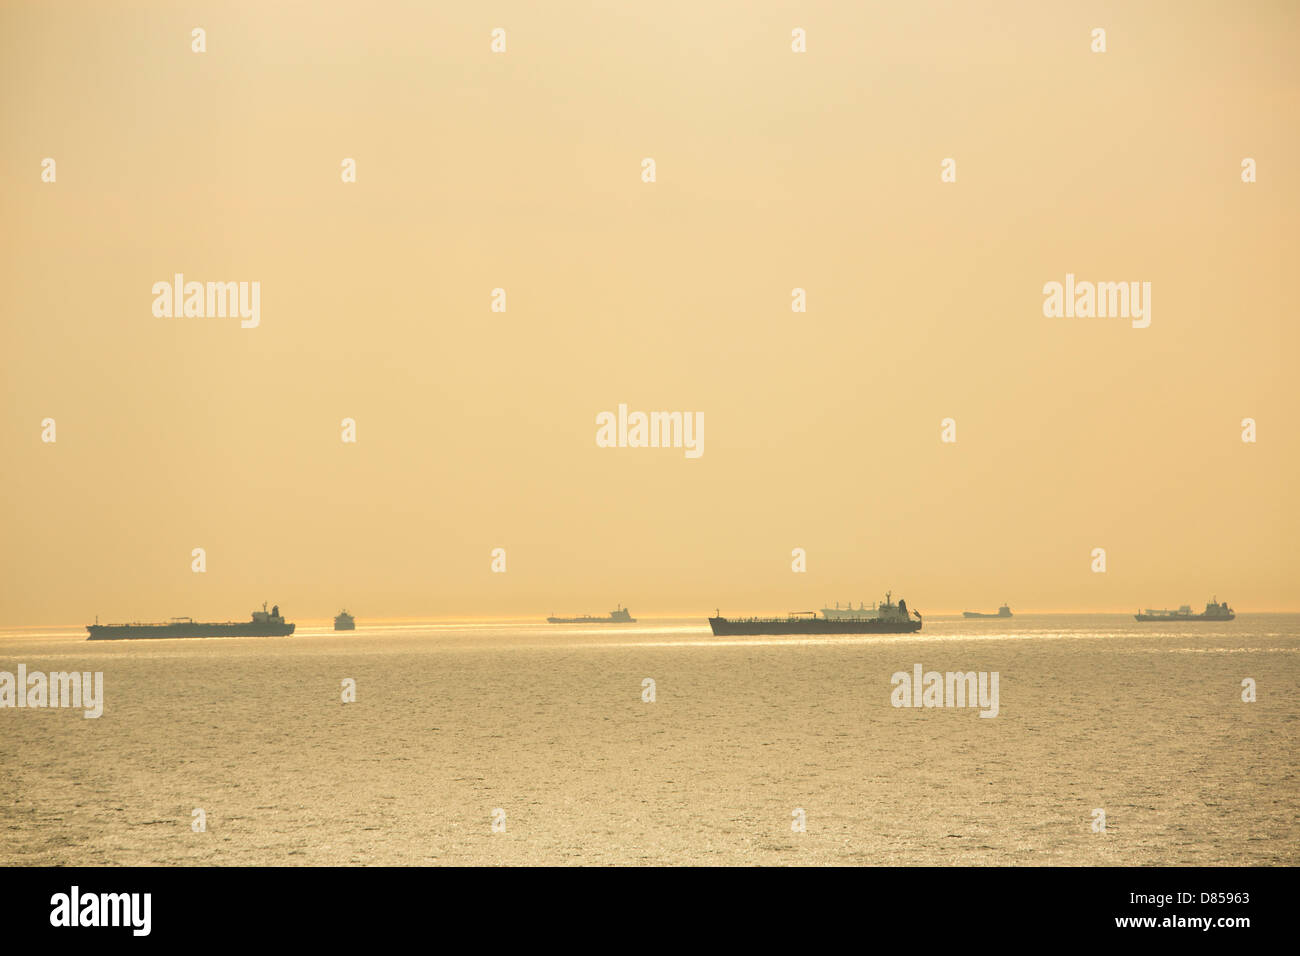 Oil and gas tankers waiting off Amsterdam to import fossil fuels. Stock Photo